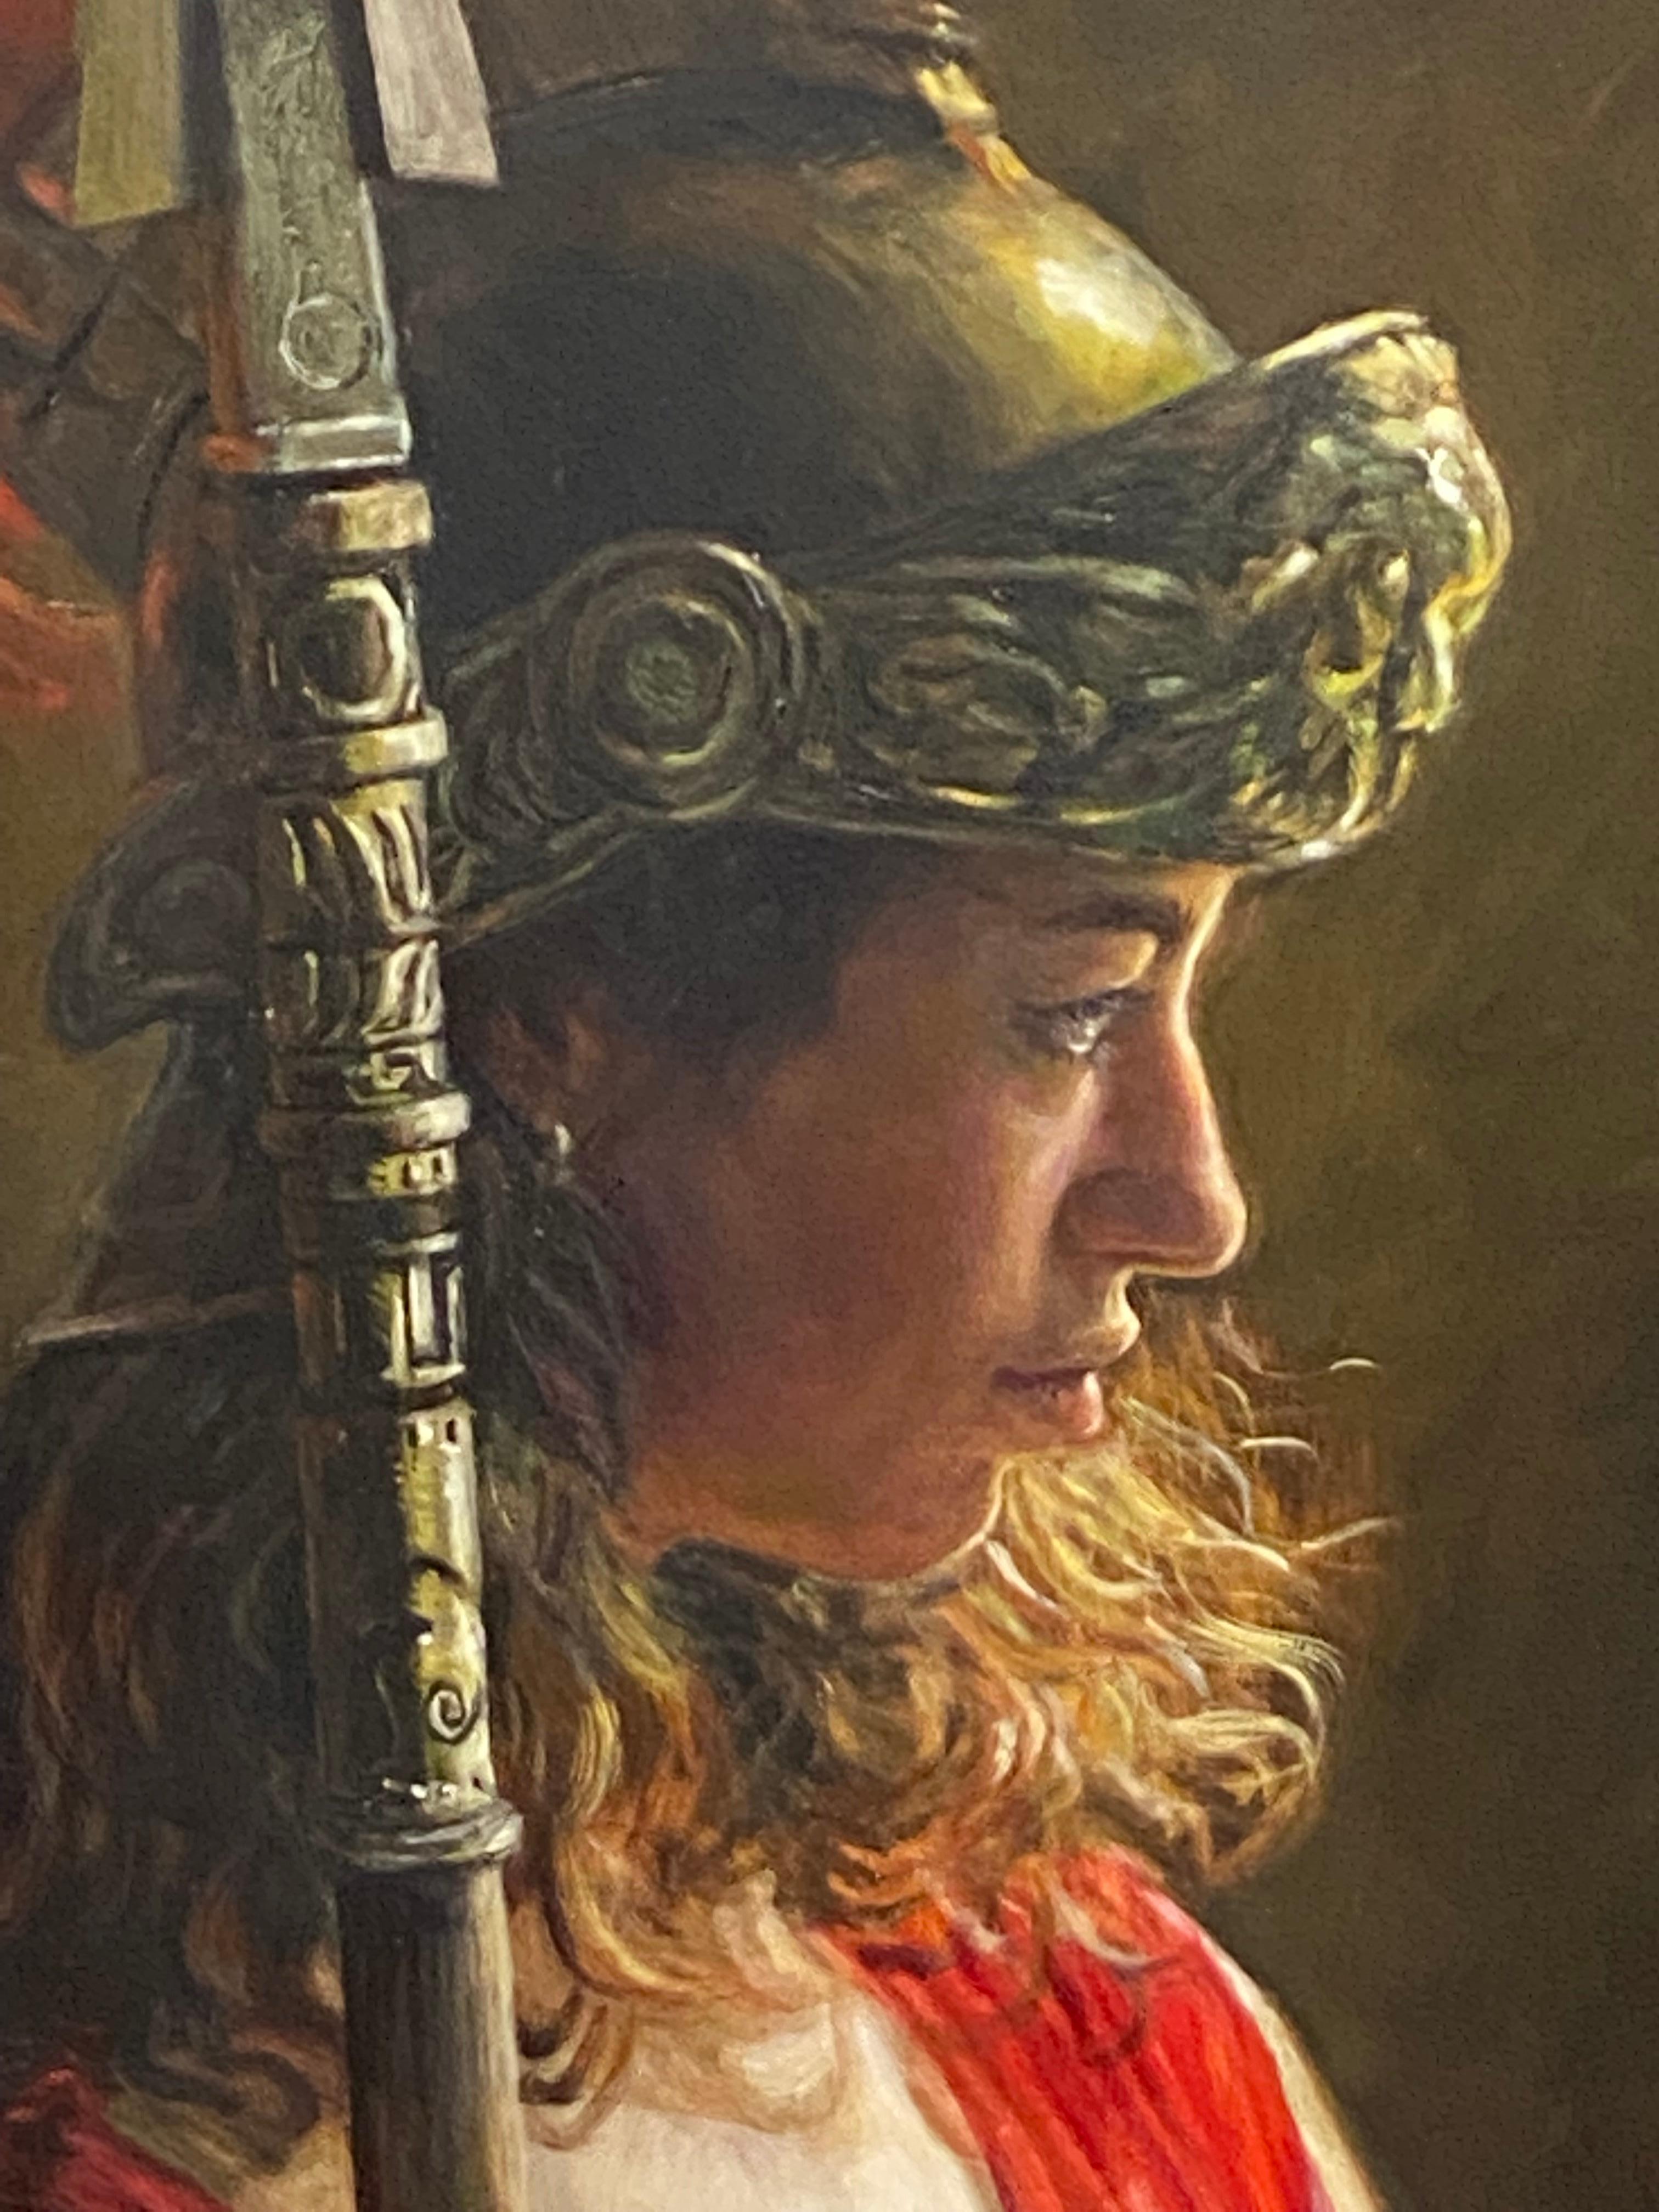 Athena
116 x 70 cm
Oil on dibond (aluminium panel)
Framed 133 x 86 cm

Dutch Female artist, painter Yvonne Heemskerk is famous in Holland because of her strong and narrative portraits. ( On the phot posing for her painting)
Winner of the Dutch